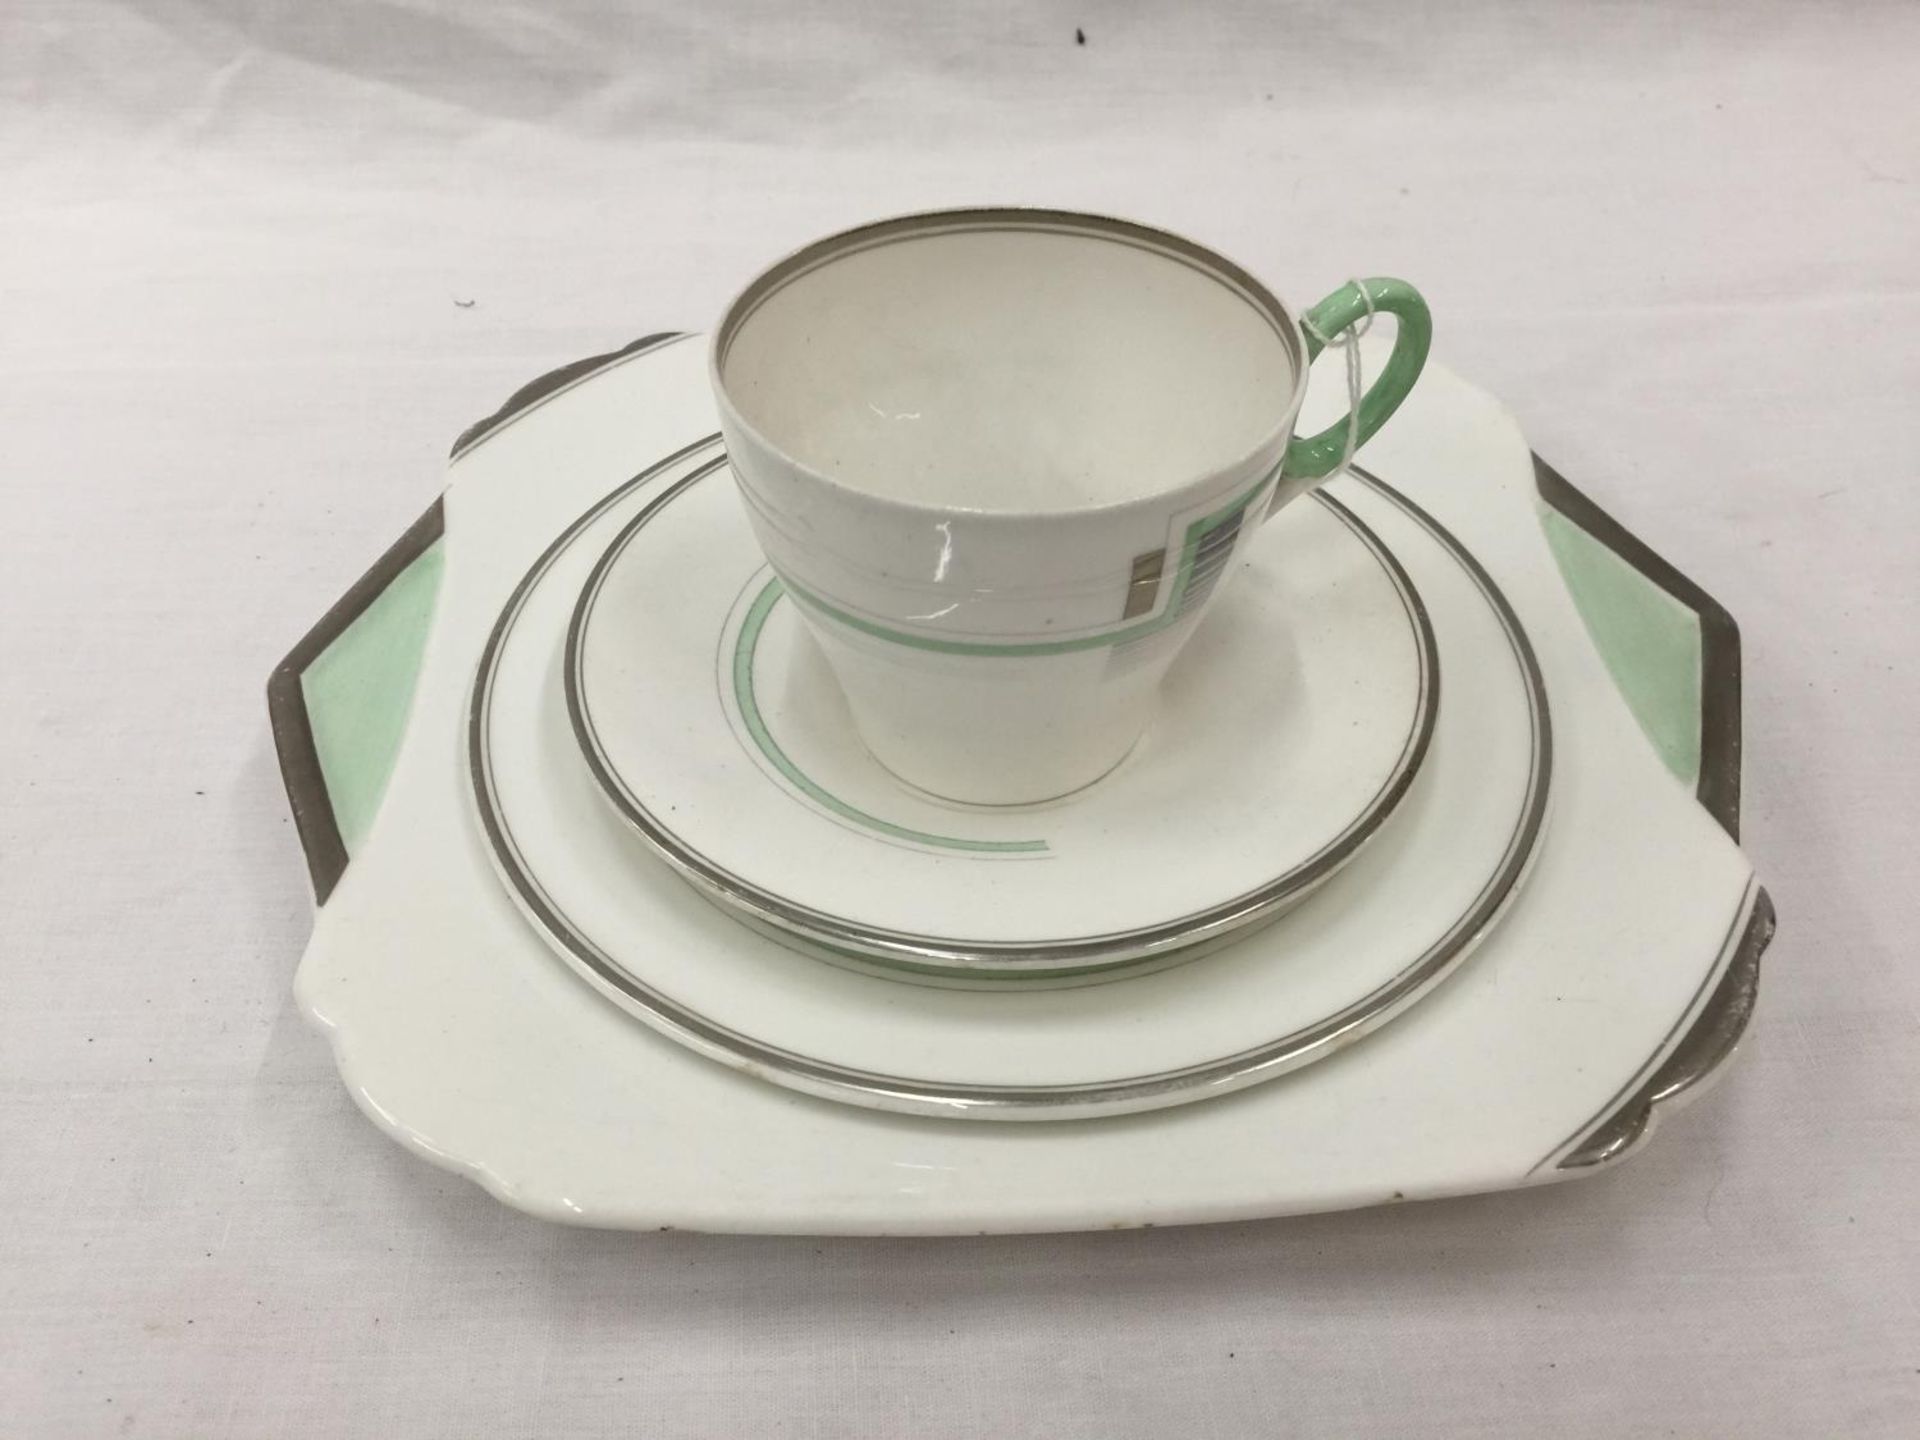 AN ART DECO STYLE SHELLEY QUAD SET MARKED C 12317 RD NO. 795072 - Image 6 of 6